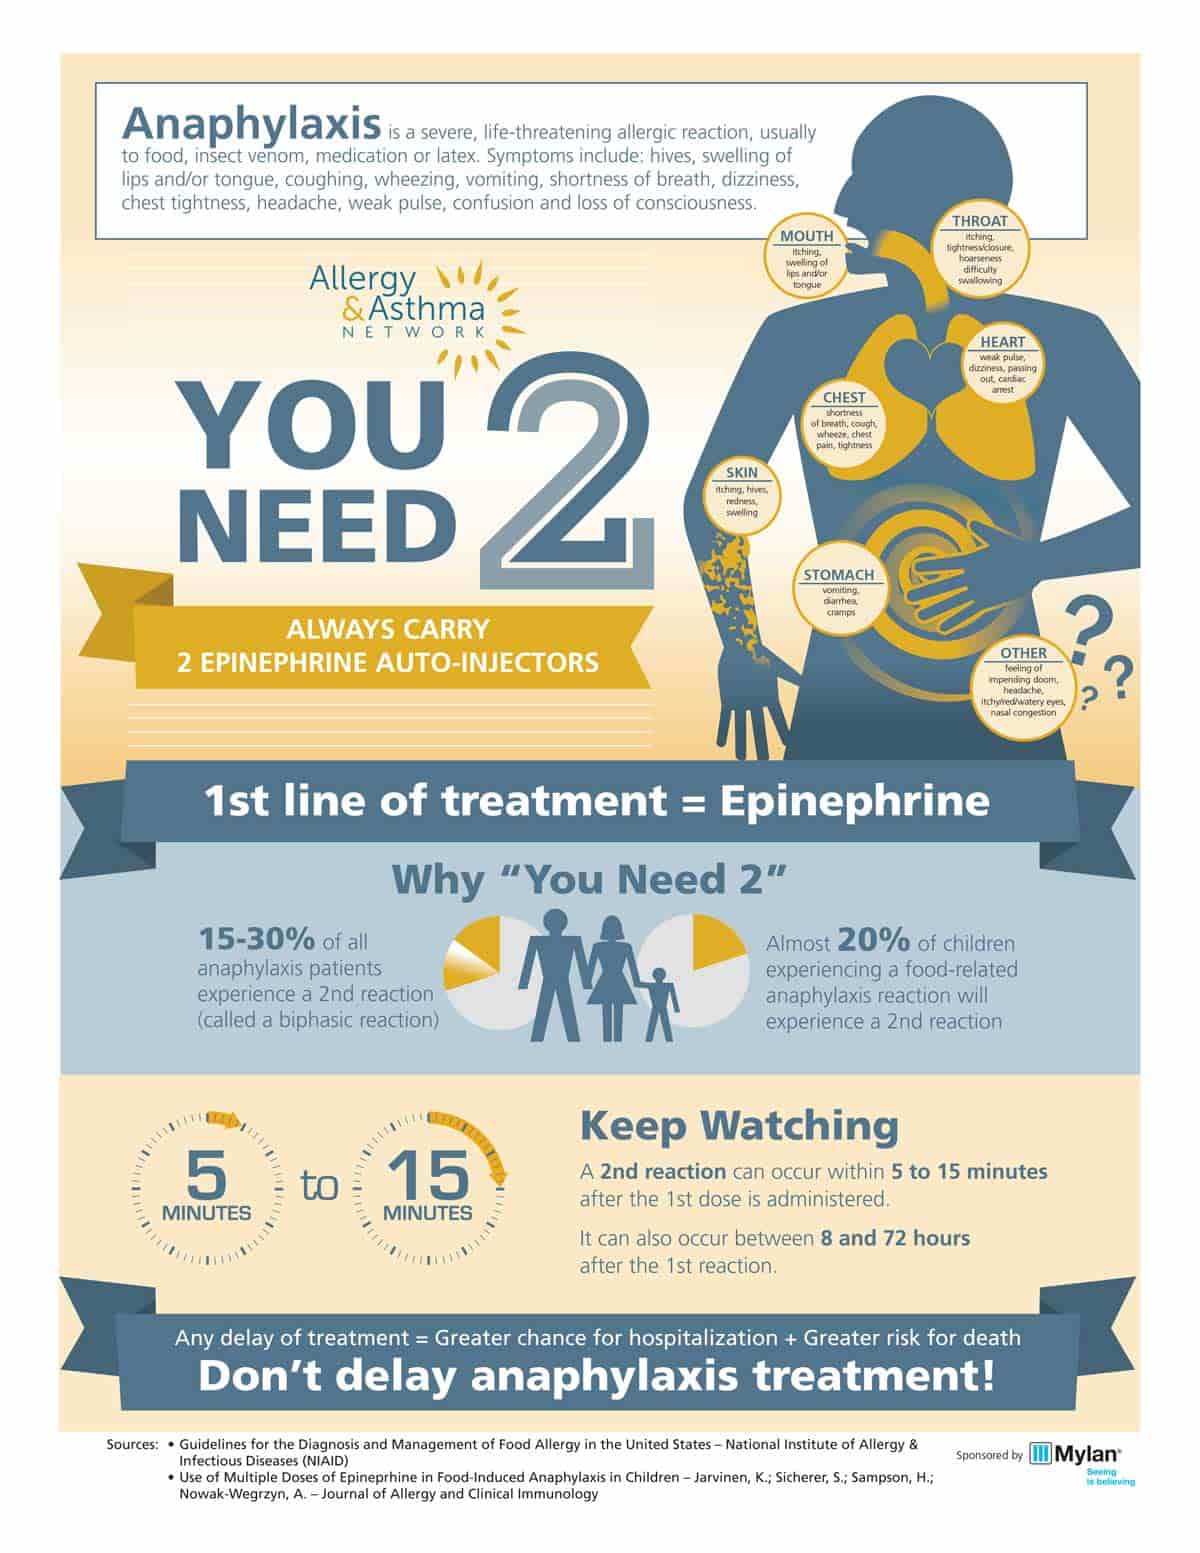 Infographic of You Need 2. It talks about the importance of needing to carry two anaphylaxis auto-injectors because you can have a second reaction up to 15 minutes after the first.